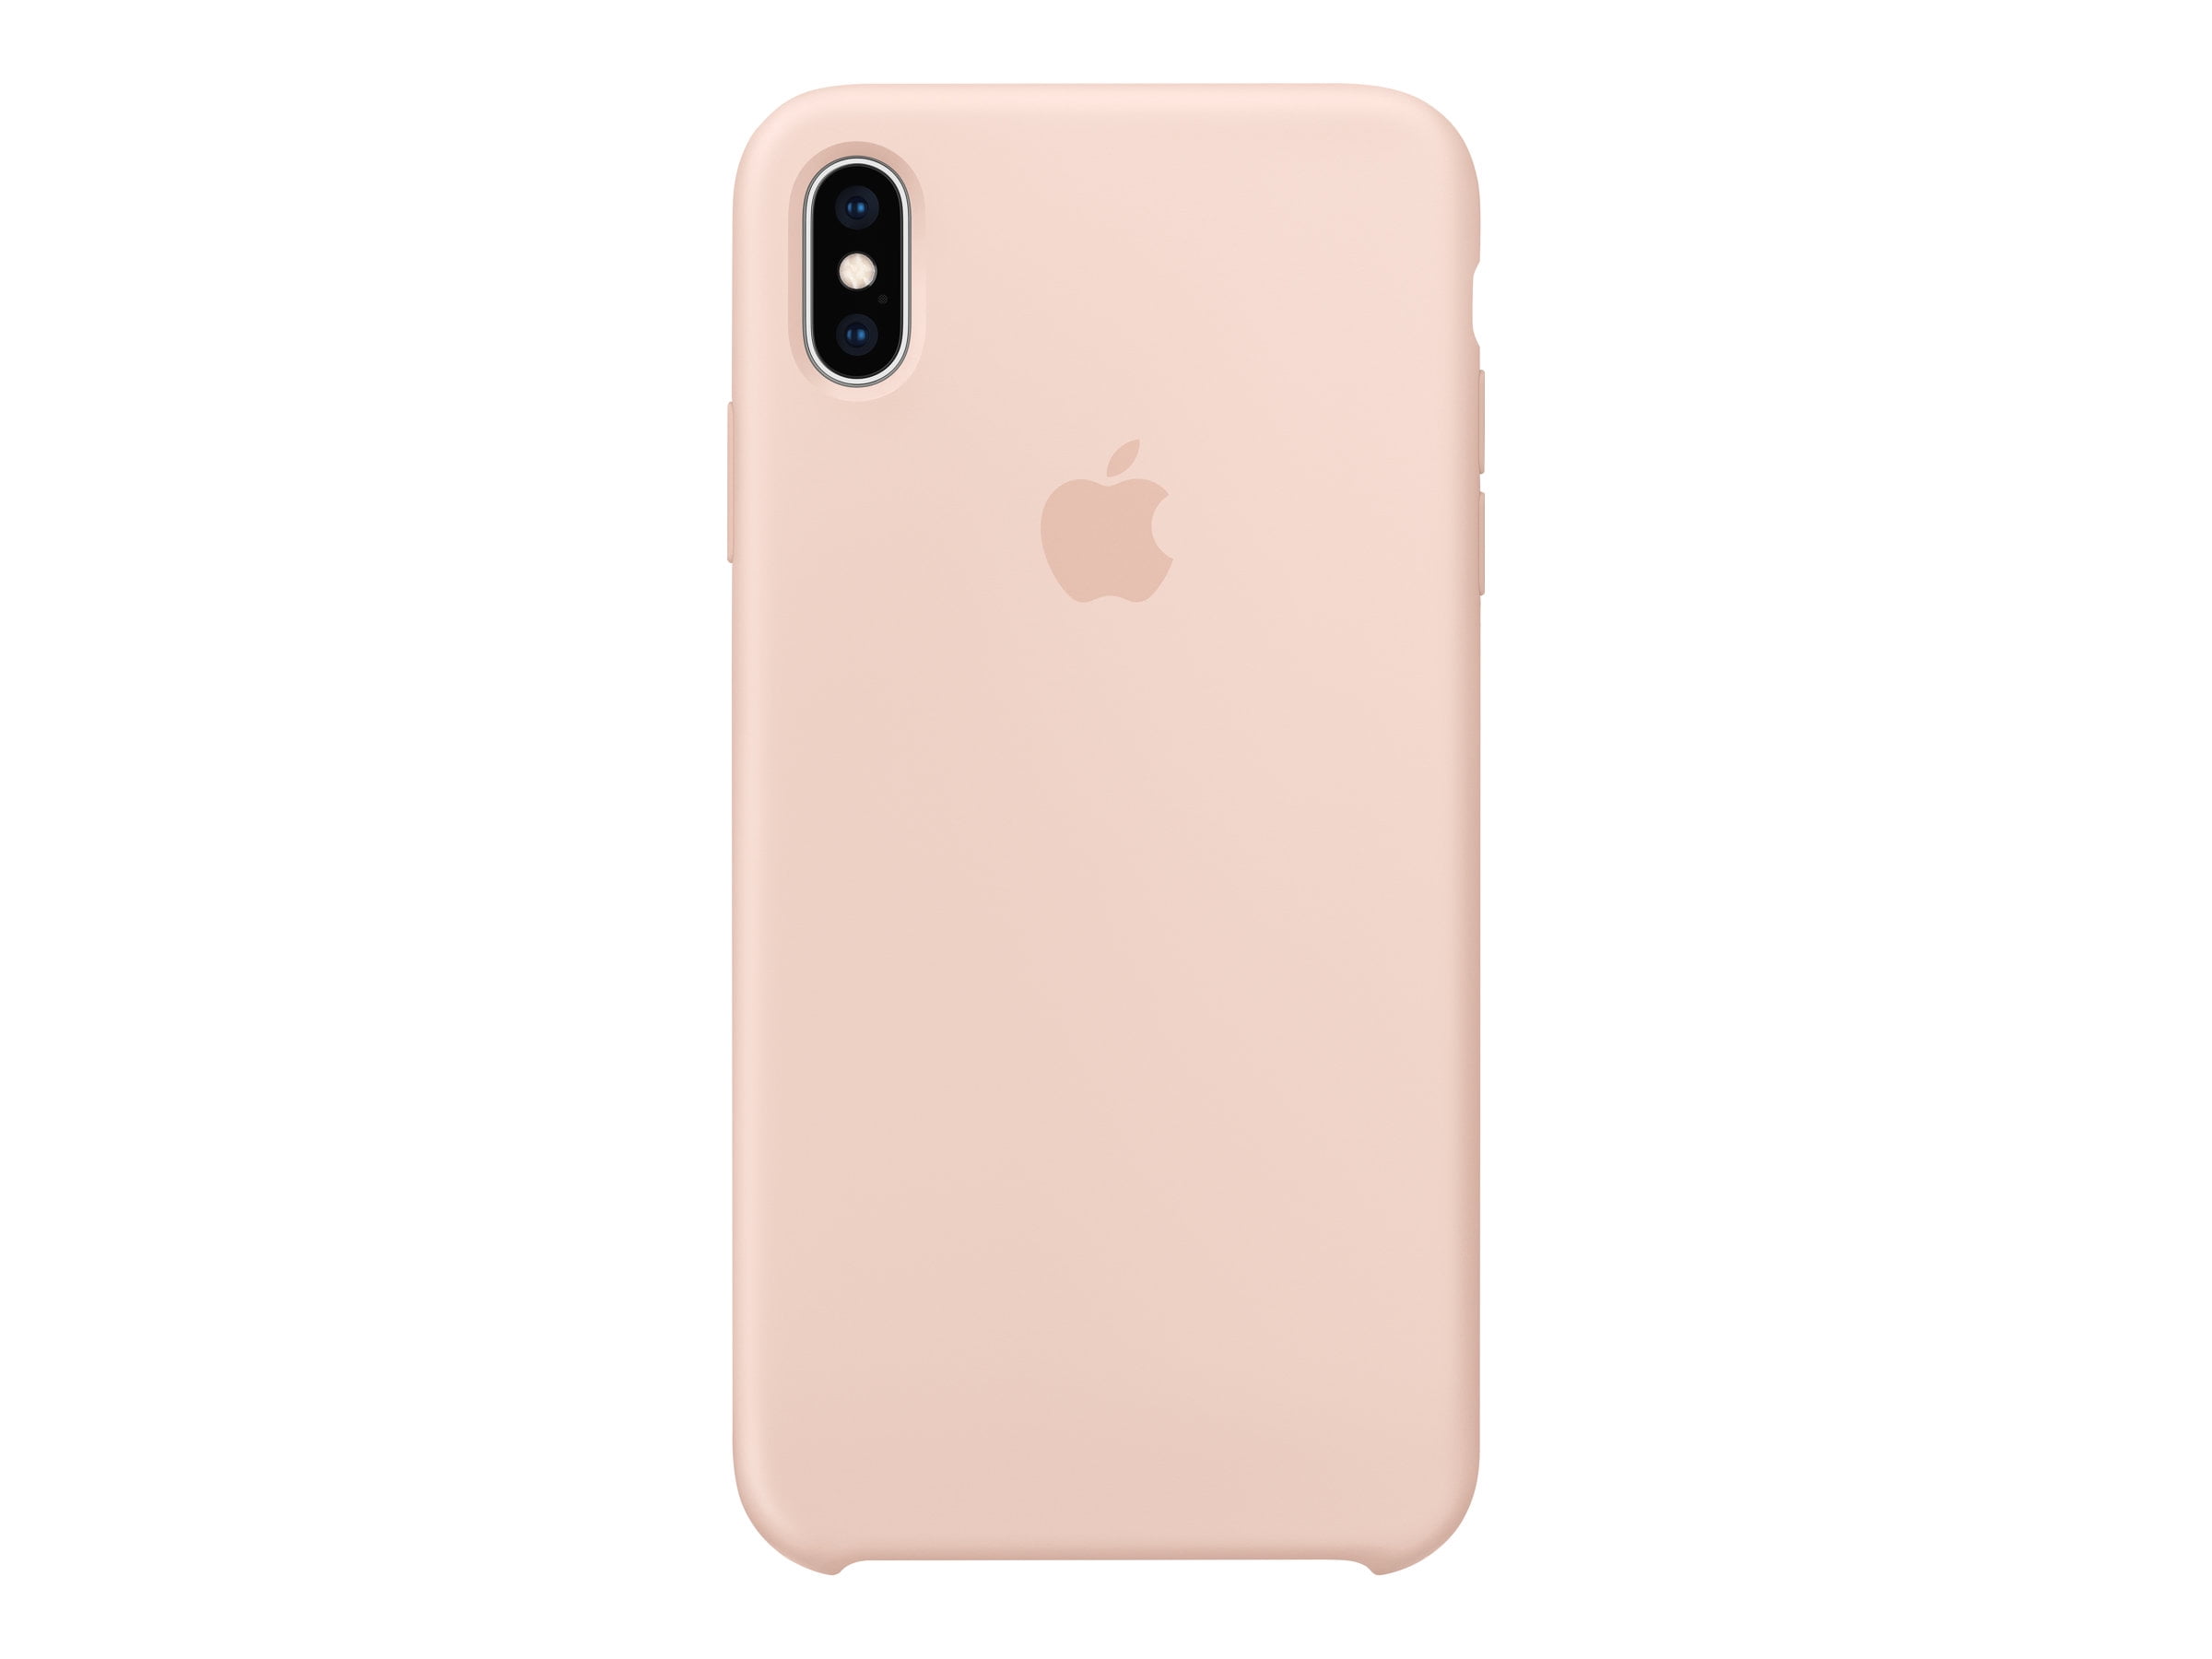 Apple Silicone Case For Iphone Xs Max Stone Walmart Com Walmart Com Enjoy and share your favorite beautiful hd wallpapers and background images. apple silicone case for iphone xs max stone